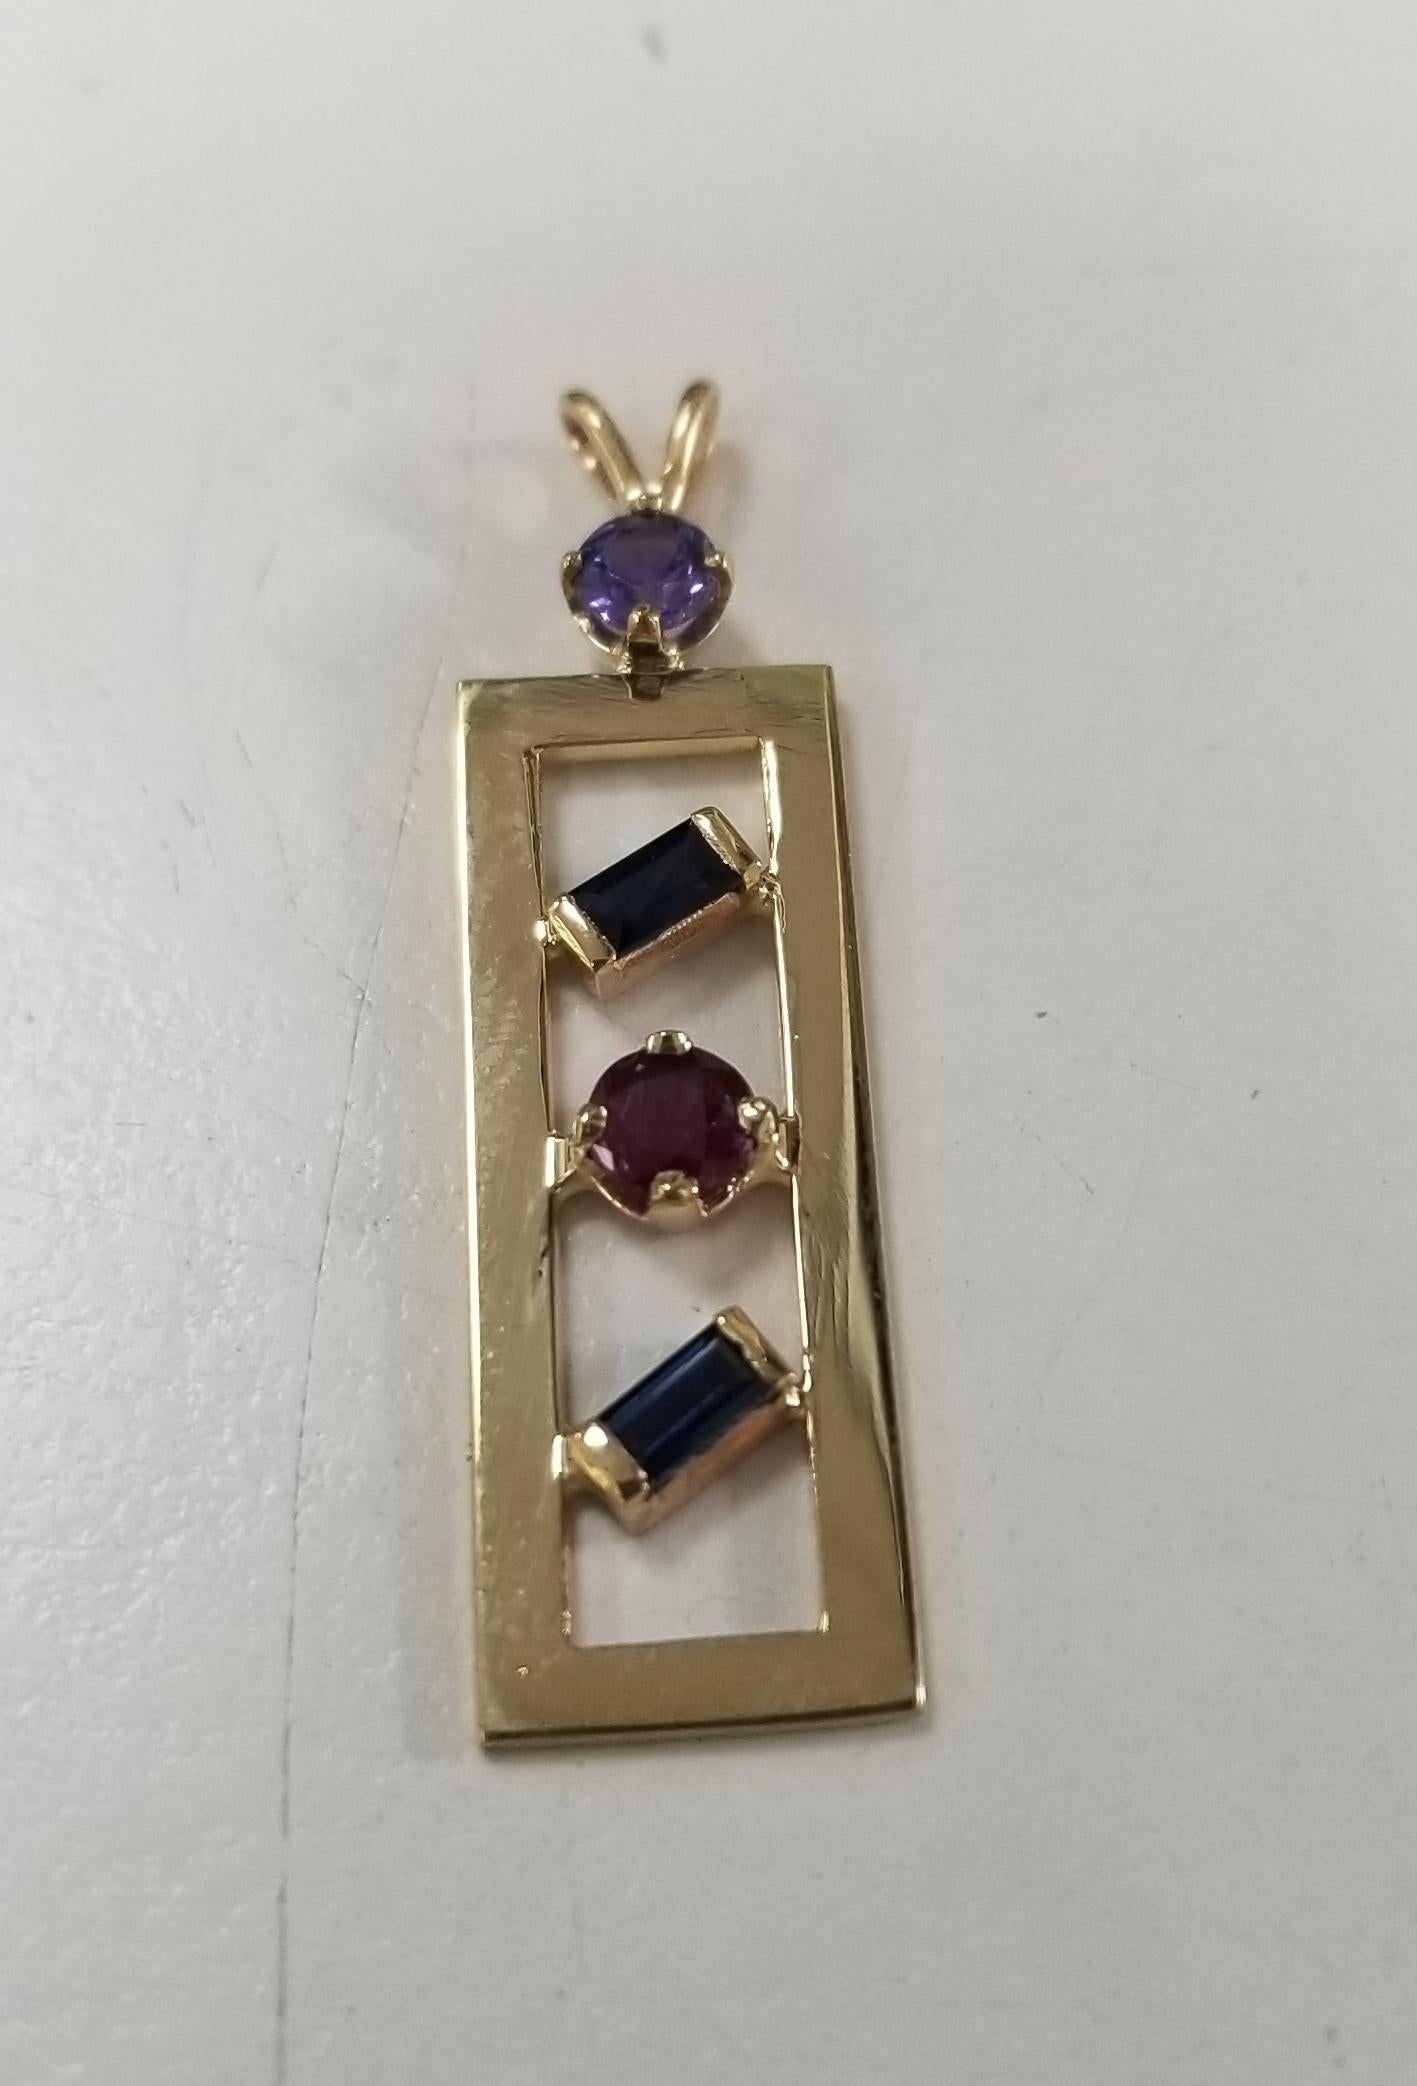 14k yellow gold multi color gemstone pendant, with sapphires, ruby and amethyst.  no chain